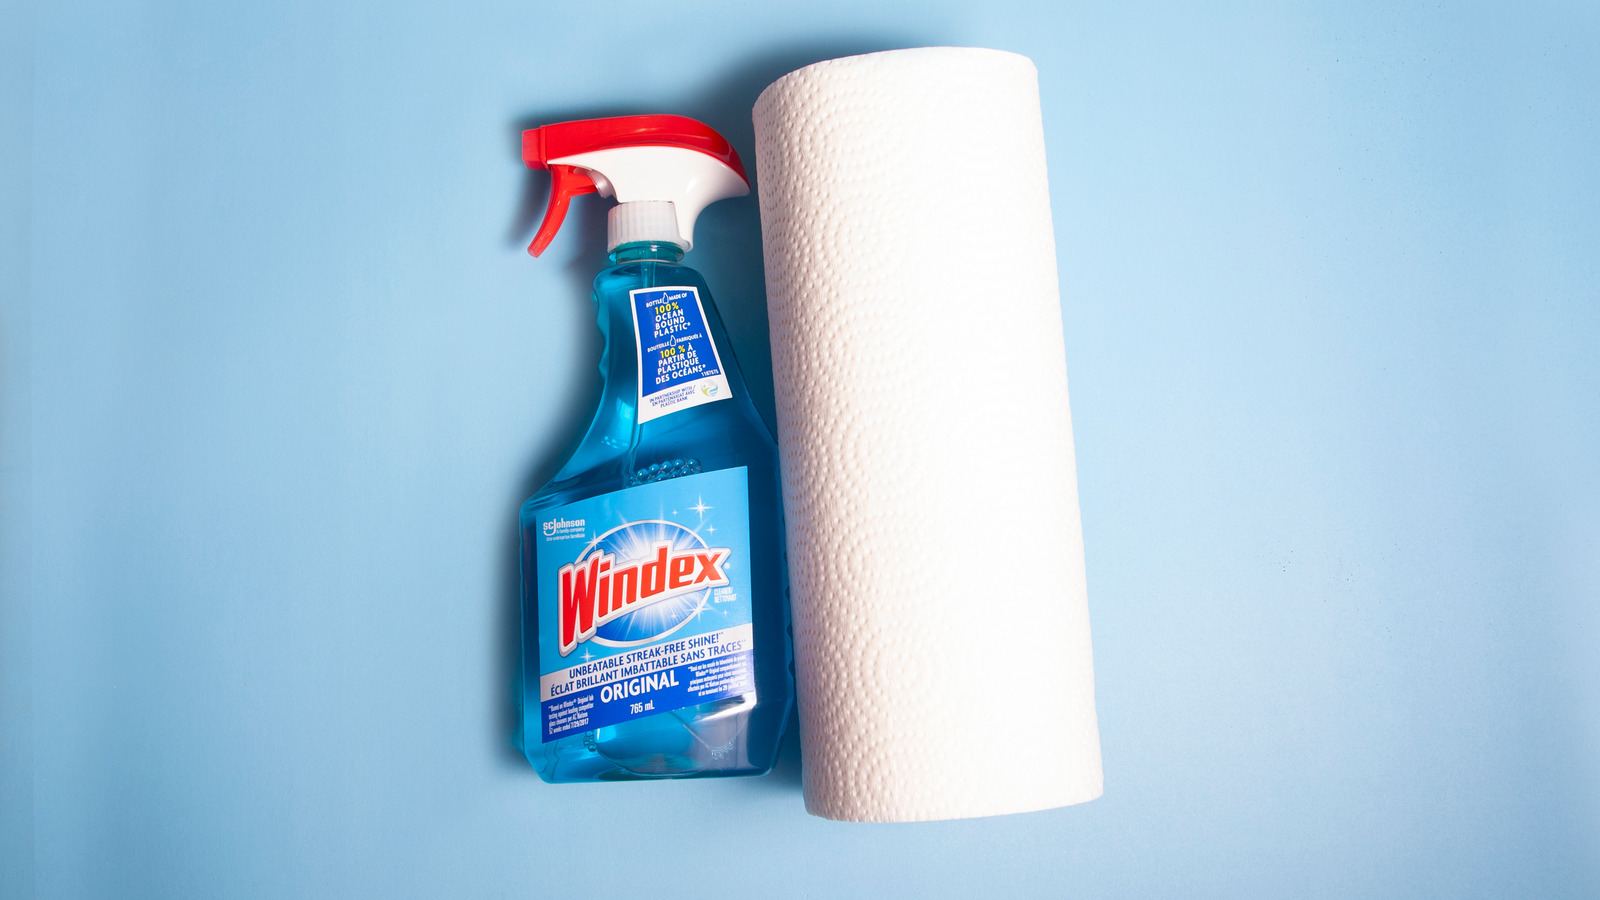 Why Should Think Twice About Cleaning Windex